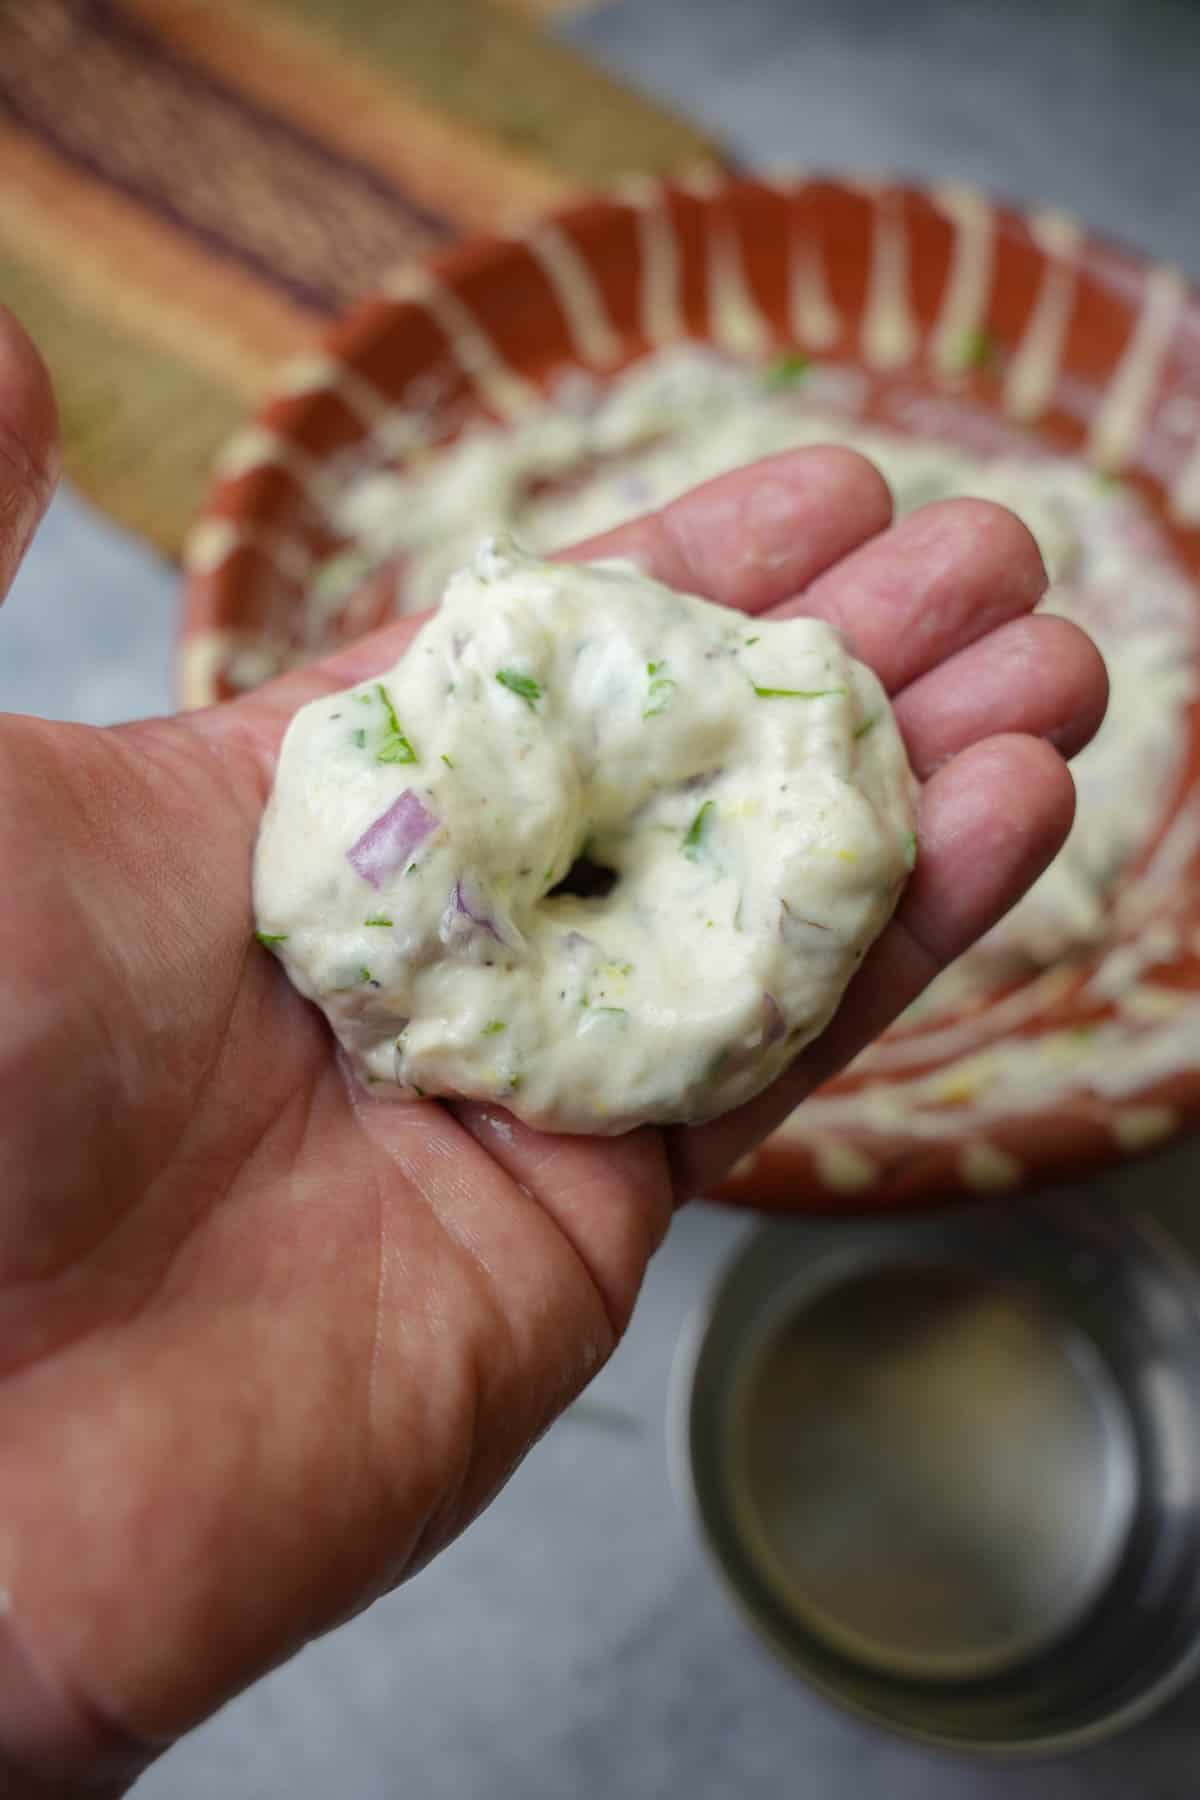 A small portion of the batter is formed into a donut shape. it is show being held in the hand over the bowl of batter.